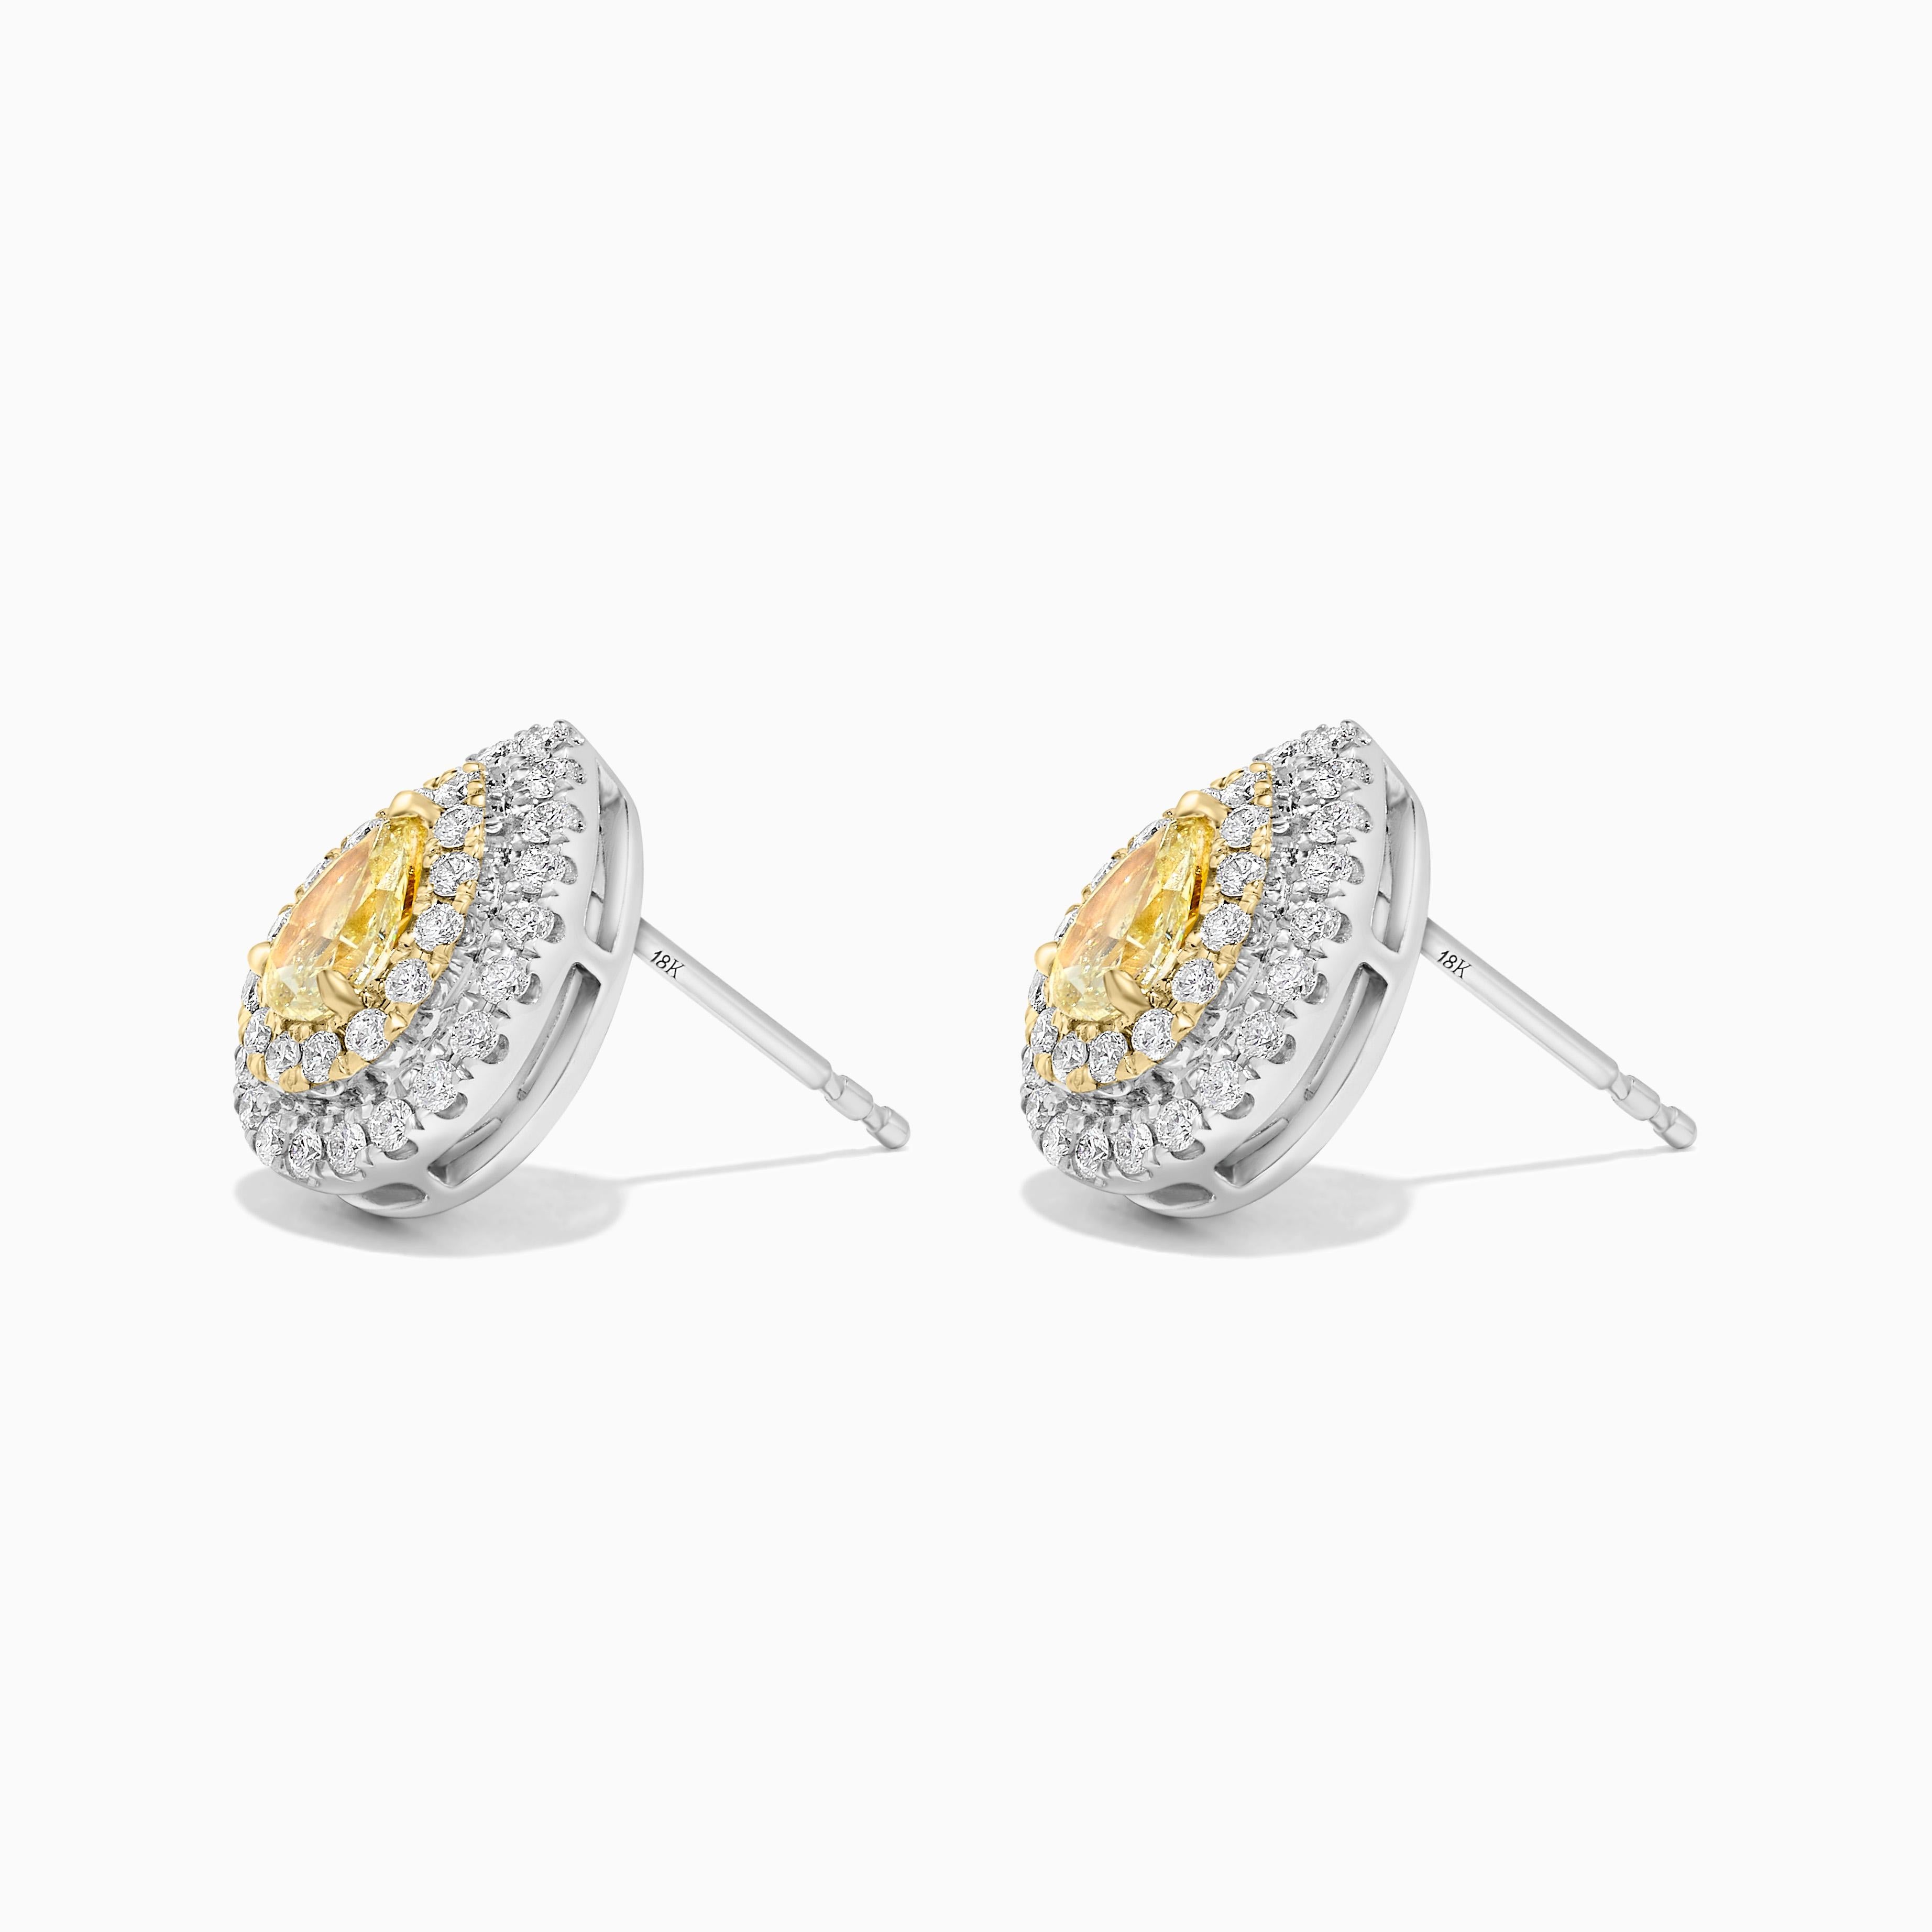 RareGemWorld's classic natural pear cut yellow diamond earrings. Mounted in a beautiful 18K Yellow and White Gold setting with natural pear cut yellow diamonds. The yellow diamonds are surrounded by small round natural white diamond melee. These